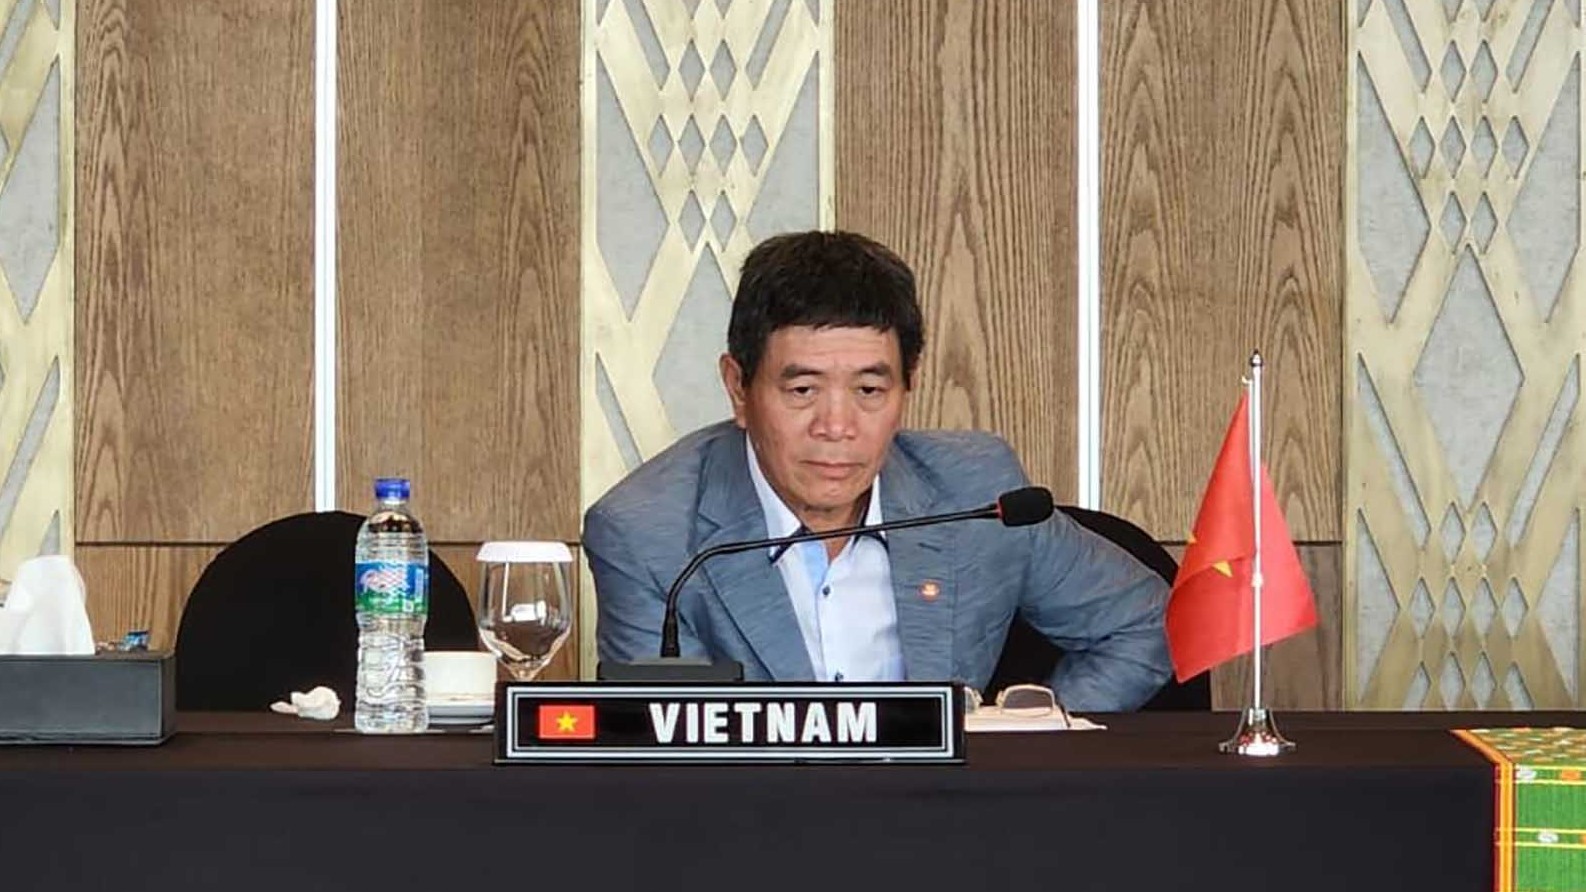 Vietnam attends various ASEAN connectivity events held in Cambodia